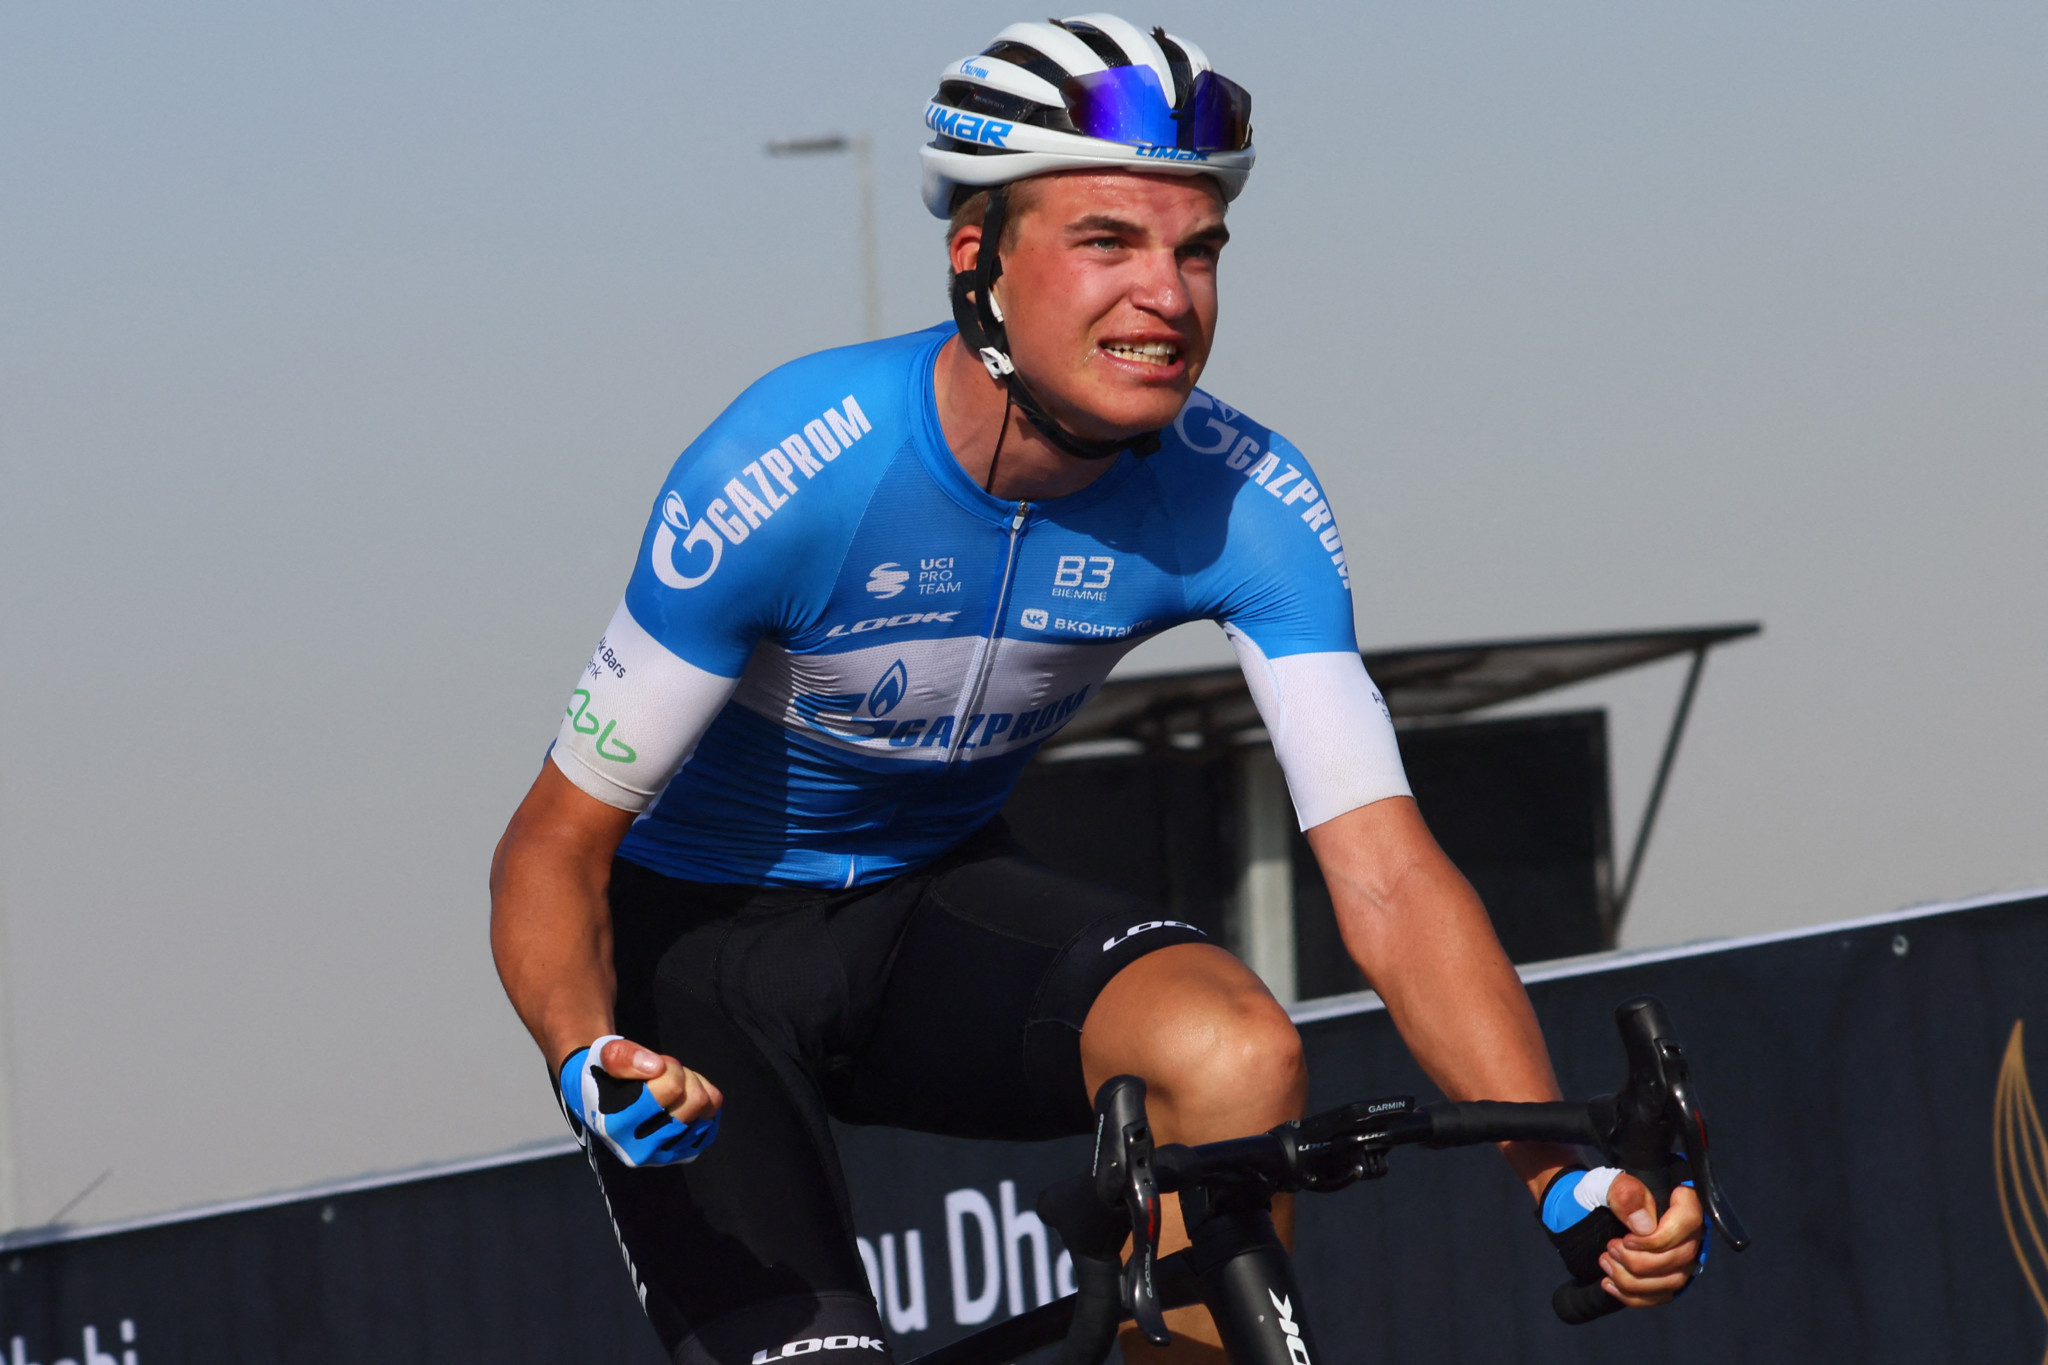 Banned team Gazprom-RusVelo awaits CAS verdict on appeal against UCI